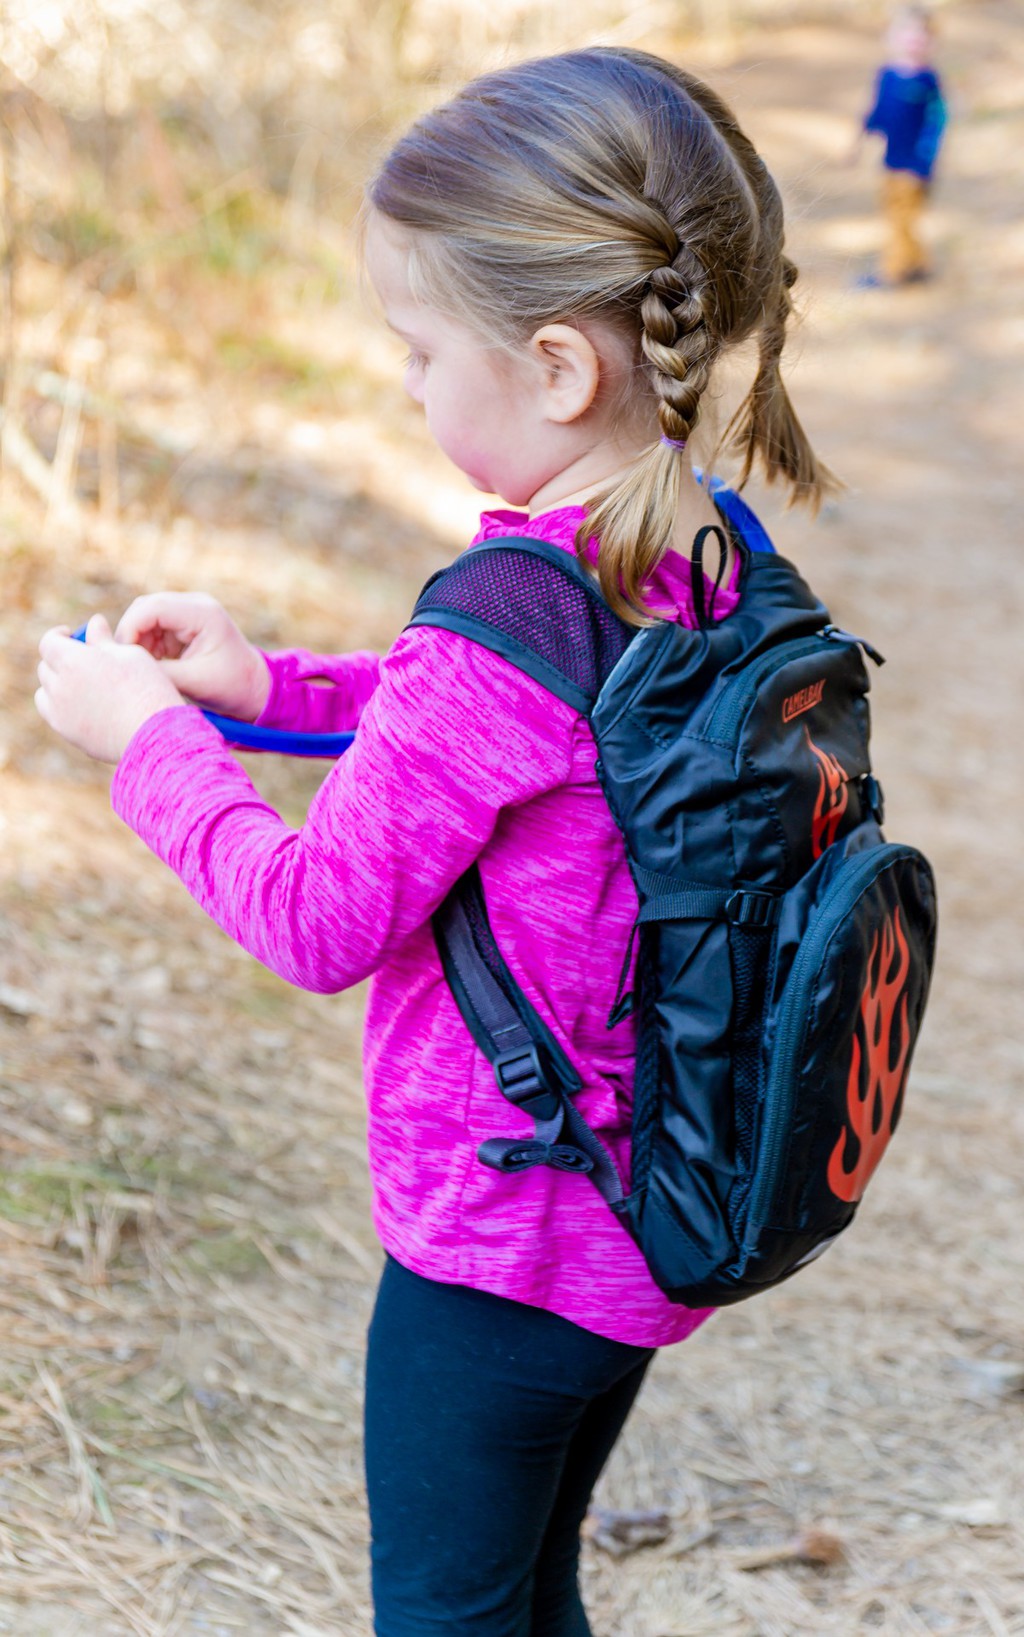 Hiking Gear: 9 Essentials For Safe Hiking Trips With The Family